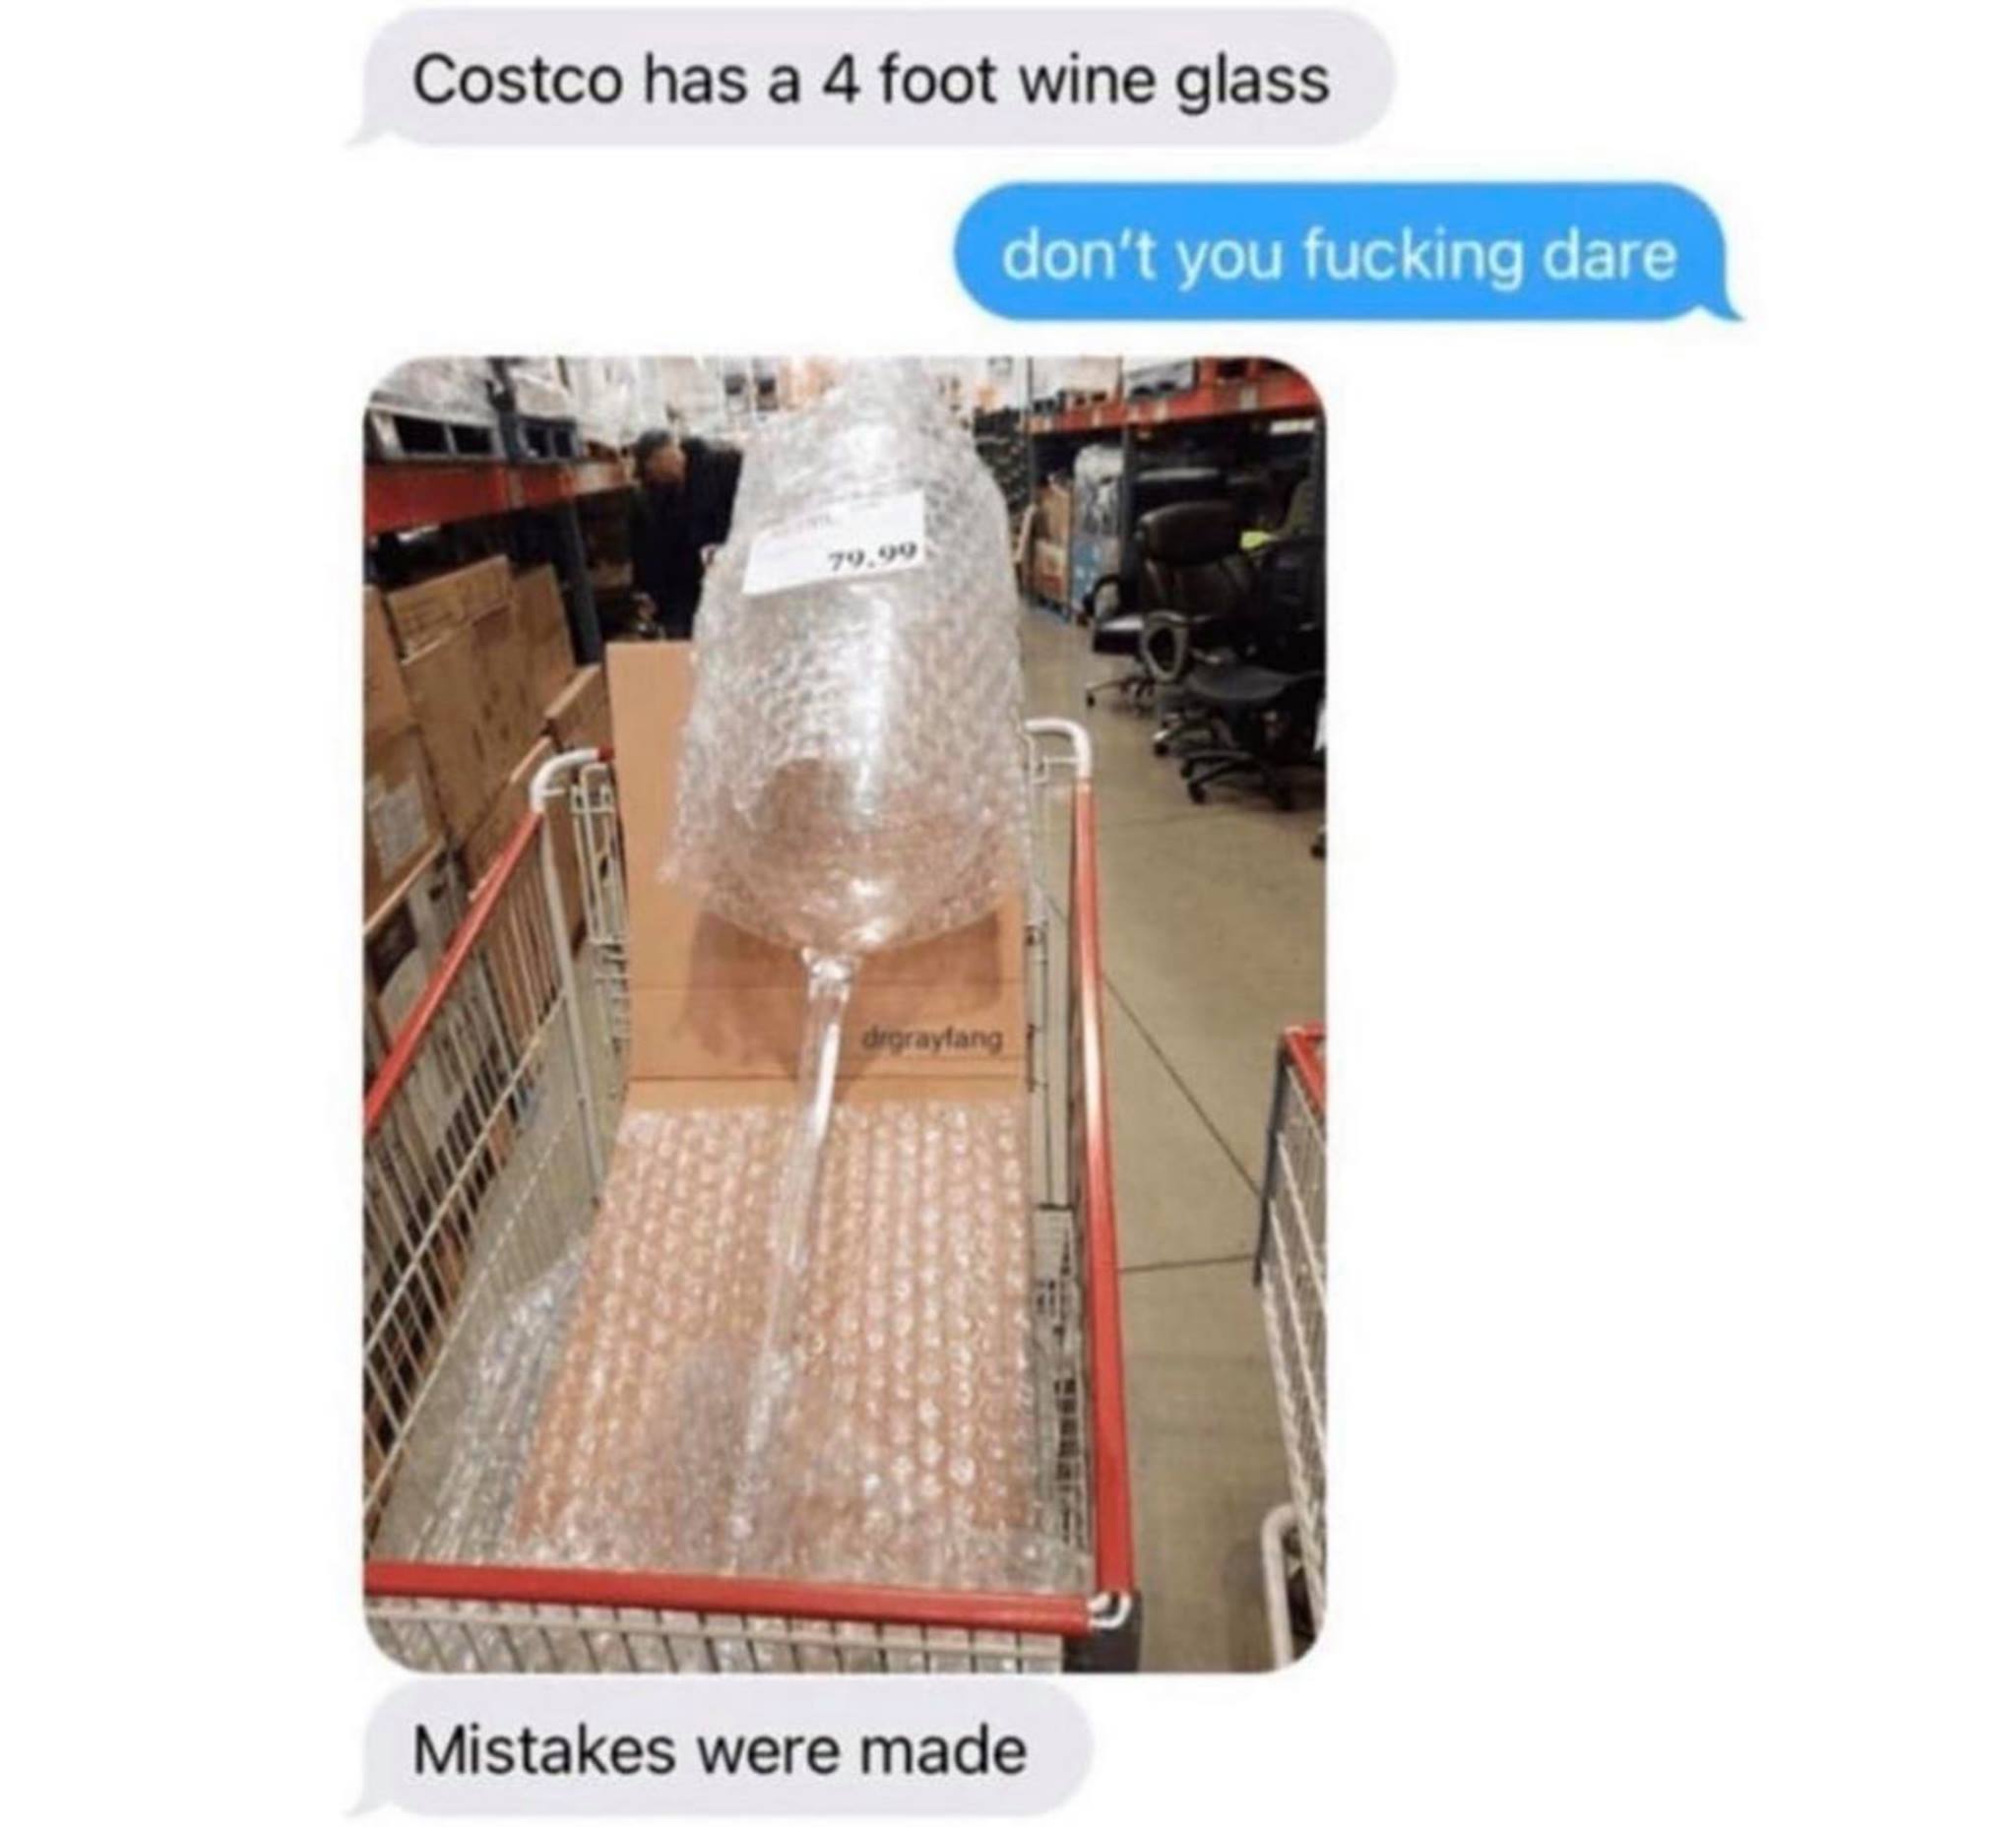 4ft wine glass meme - Costco has a 4 foot wine glass don't you fucking dare 79.99 drgraylang Mistakes were made